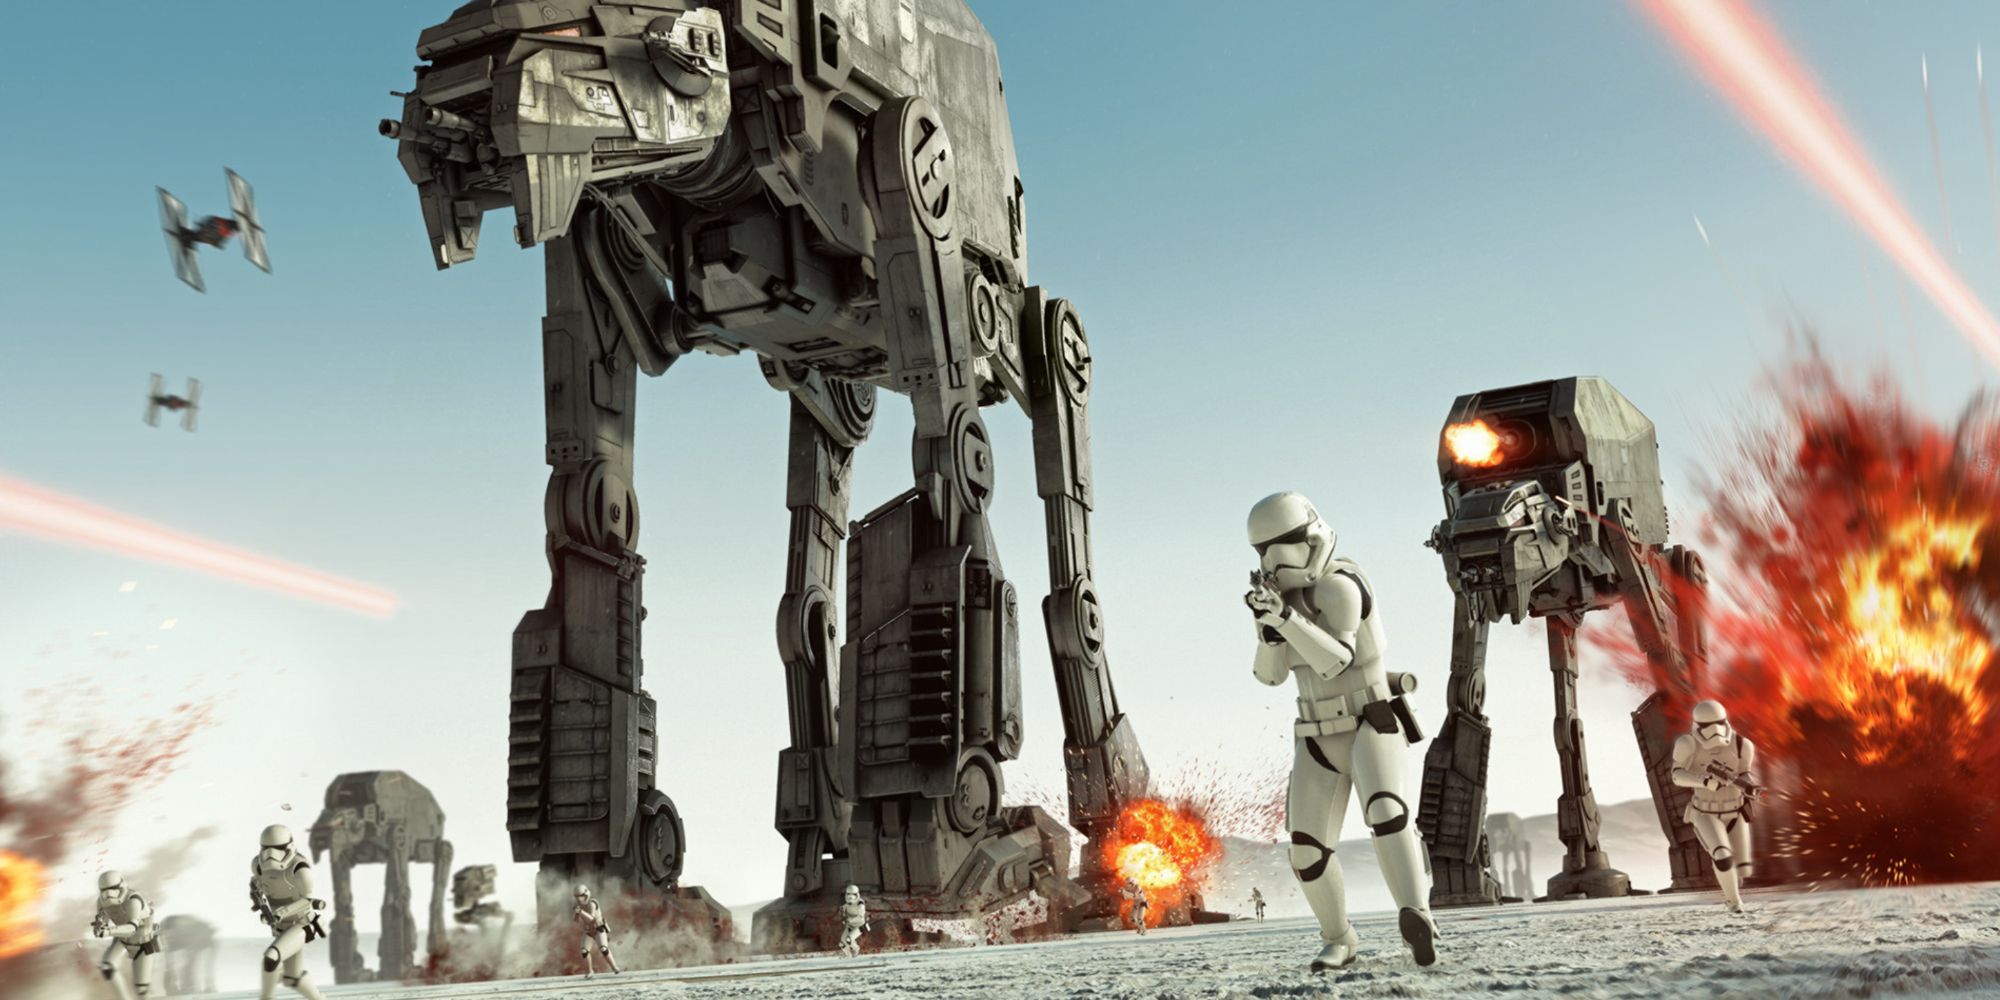 AT-M6 Walkers and Stormtroopers during a battle on Crait in Star Wrs Battlefront 2